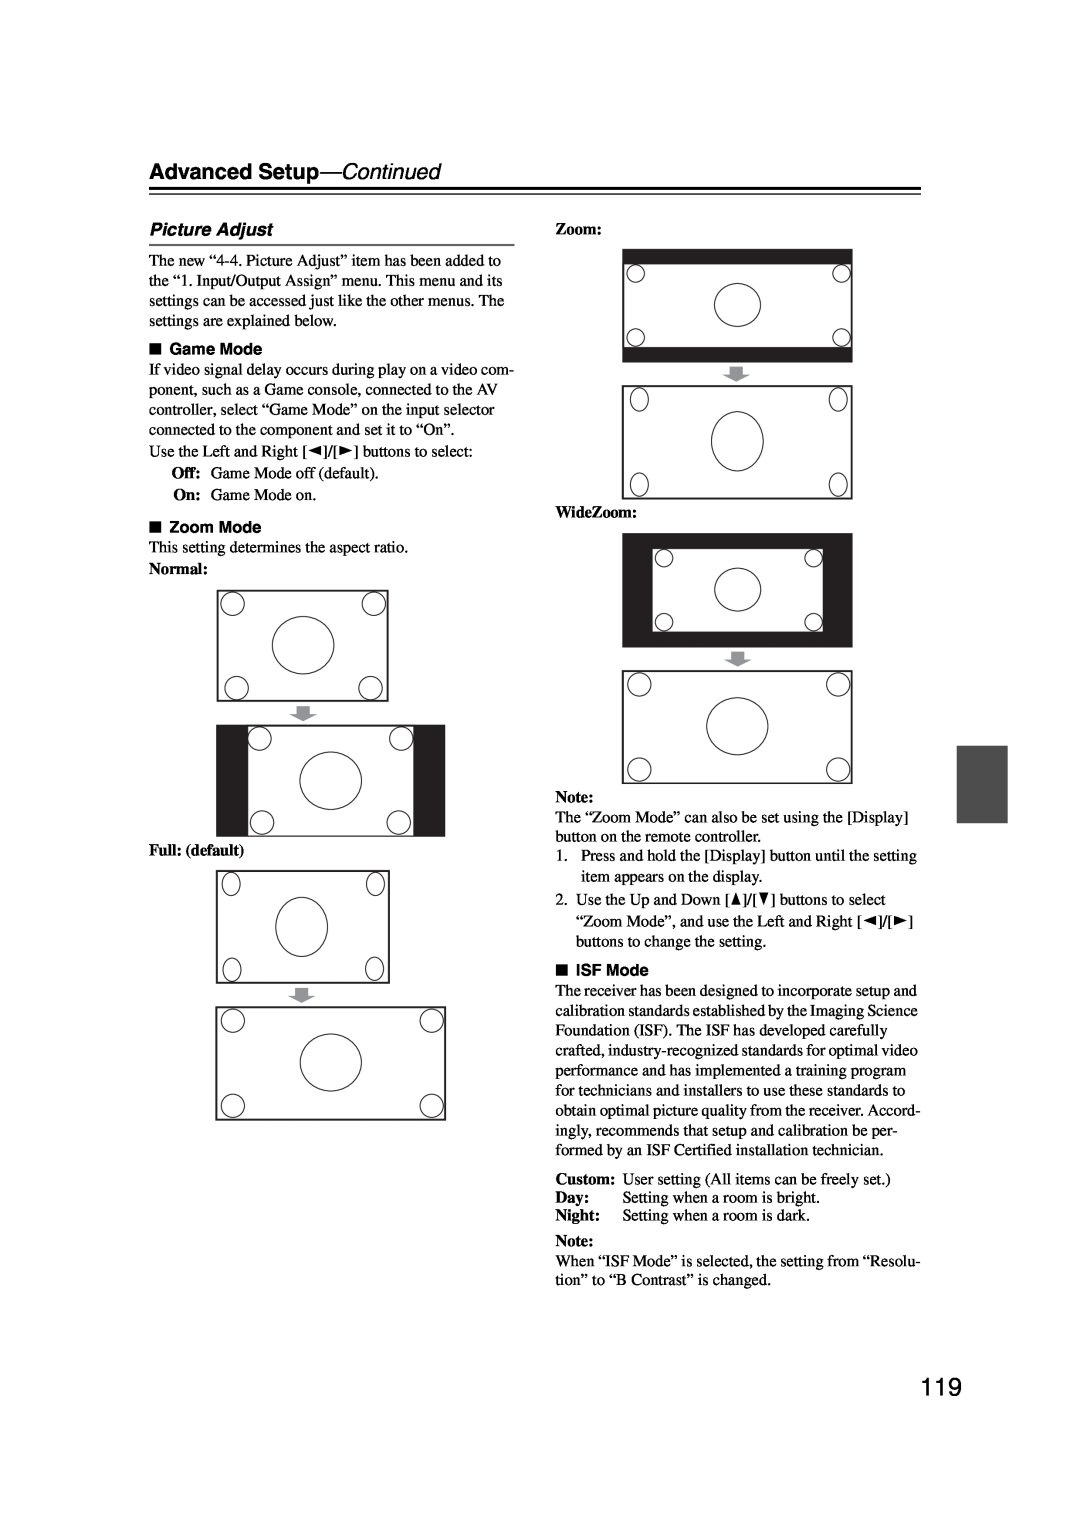 Integra DHC-9.9 instruction manual Picture Adjust, Normal Full: default, Zoom WideZoom, Advanced Setup—Continued 